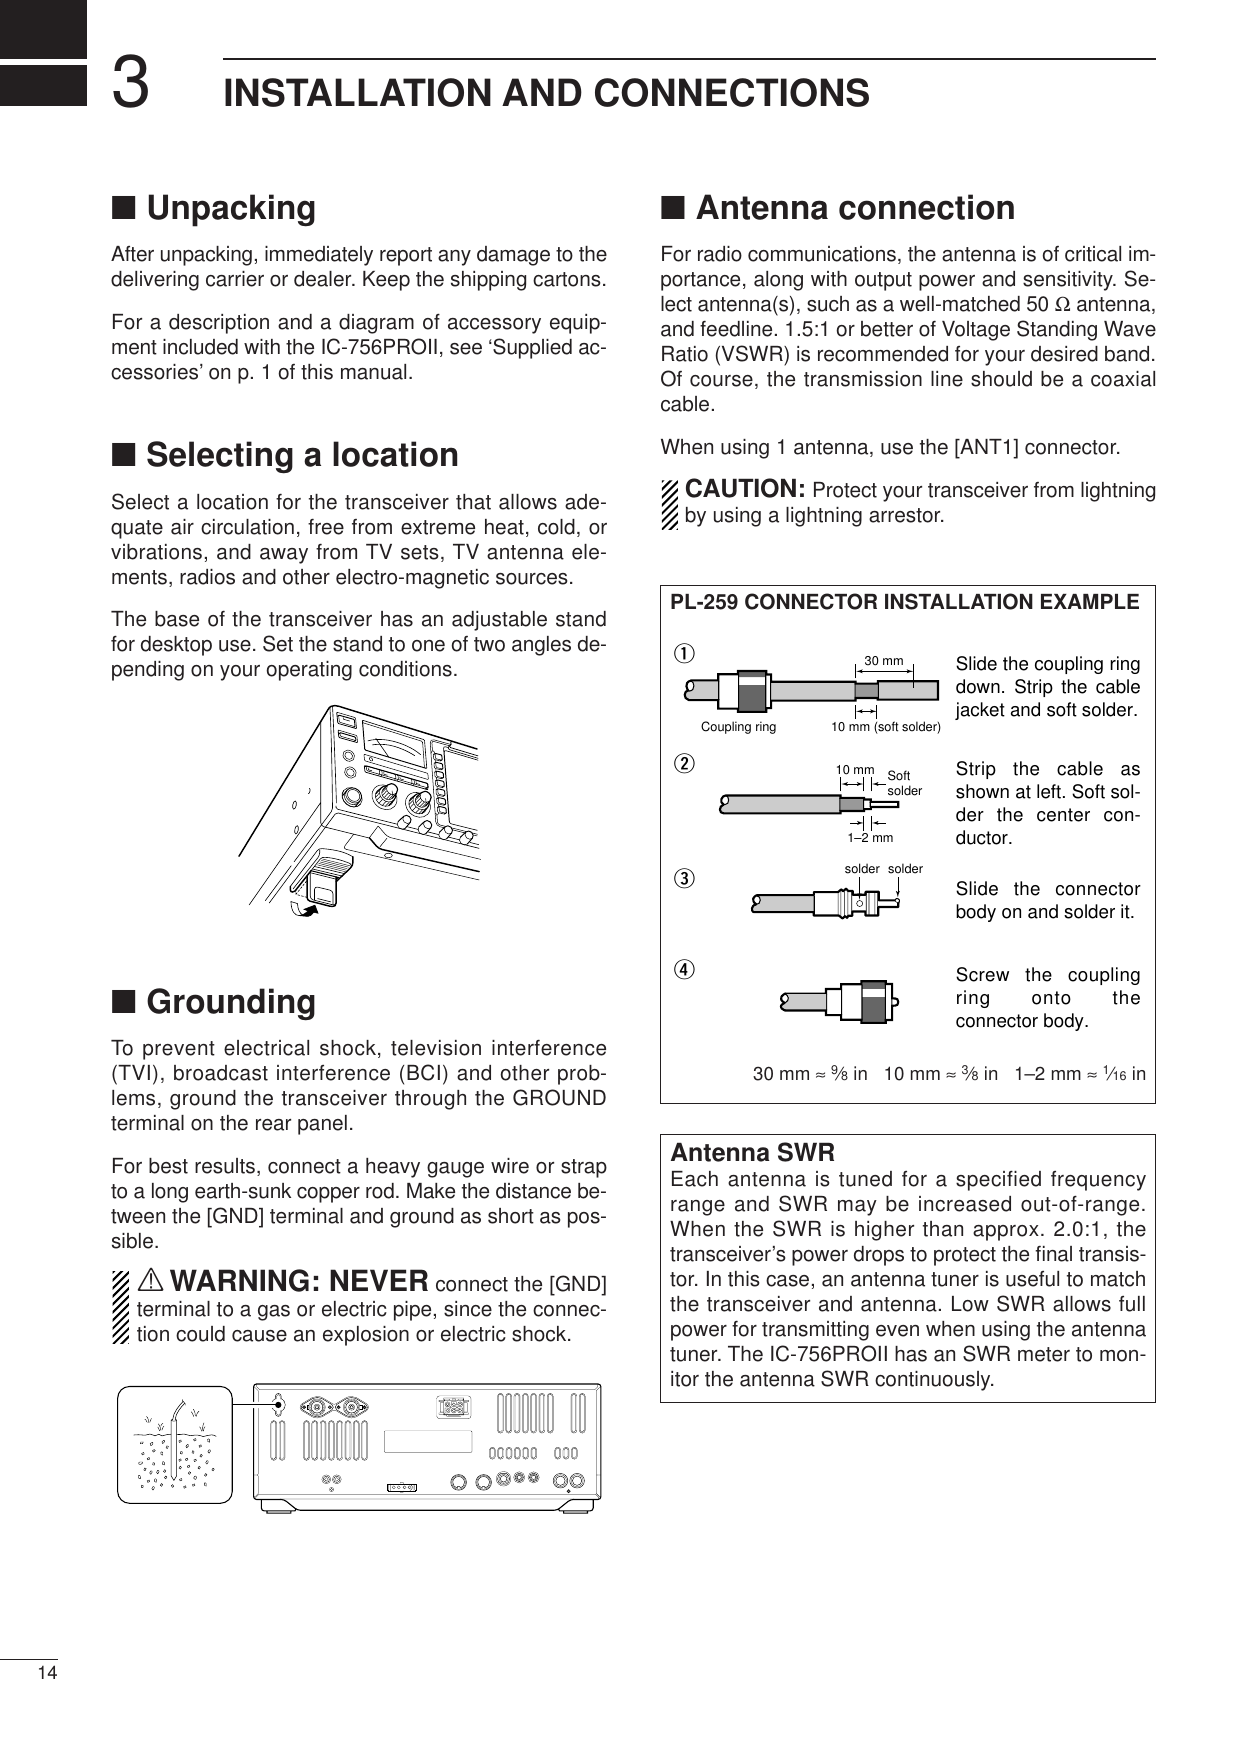 314INSTALLATION AND CONNECTIONS■UnpackingAfter unpacking, immediately report any damage to thedelivering carrier or dealer. Keep the shipping cartons.For a description and a diagram of accessory equip-ment included with the IC-756PROII, see ‘Supplied ac-cessories’ on p. 1 of this manual.■Selecting a locationSelect a location for the transceiver that allows ade-quate air circulation, free from extreme heat, cold, orvibrations, and away from TV sets, TV antenna ele-ments, radios and other electro-magnetic sources.The base of the transceiver has an adjustable standfor desktop use. Set the stand to one of two angles de-pending on your operating conditions.■GroundingTo prevent electrical shock, television interference(TVI), broadcast interference (BCI) and other prob-lems, ground the transceiver through the GROUNDterminal on the rear panel.For best results, connect a heavy gauge wire or strapto a long earth-sunk copper rod. Make the distance be-tween the [GND] terminal and ground as short as pos-sible.RWARNING: NEVER connect the [GND]terminal to a gas or electric pipe, since the connec-tion could cause an explosion or electric shock.■Antenna connectionFor radio communications, the antenna is of critical im-portance, along with output power and sensitivity. Se-lect antenna(s), such as a well-matched 50 Ωantenna,and feedline. 1.5:1 or better of Voltage Standing WaveRatio (VSWR) is recommended for your desired band.Of course, the transmission line should be a coaxialcable.When using 1 antenna, use the [ANT1] connector.CAUTION: Protect your transceiver from lightningby using a lightning arrestor.Antenna SWREach antenna is tuned for a specified frequencyrange and SWR may be increased out-of-range.When the SWR is higher than approx. 2.0:1, thetransceiver’s power drops to protect the ﬁnal transis-tor. In this case, an antenna tuner is useful to matchthe transceiver and antenna. Low SWR allows fullpower for transmitting even when using the antennatuner. The IC-756PROII has an SWR meter to mon-itor the antenna SWR continuously.PL-259 CONNECTOR INSTALLATION EXAMPLE30 mm ≈9⁄8in   10 mm ≈3⁄8in   1–2 mm ≈1⁄16 in30 mm10 mm (soft solder)10 mm1–2 mmsolder solderSoftsolderCoupling ringSlide the coupling ring down. Strip the cable jacket and soft solder.Slide the connector body on and solder it.Screw the coupling ring onto the connector body.Strip the cable as shown at left. Soft sol-der the center con-ductor.qwer